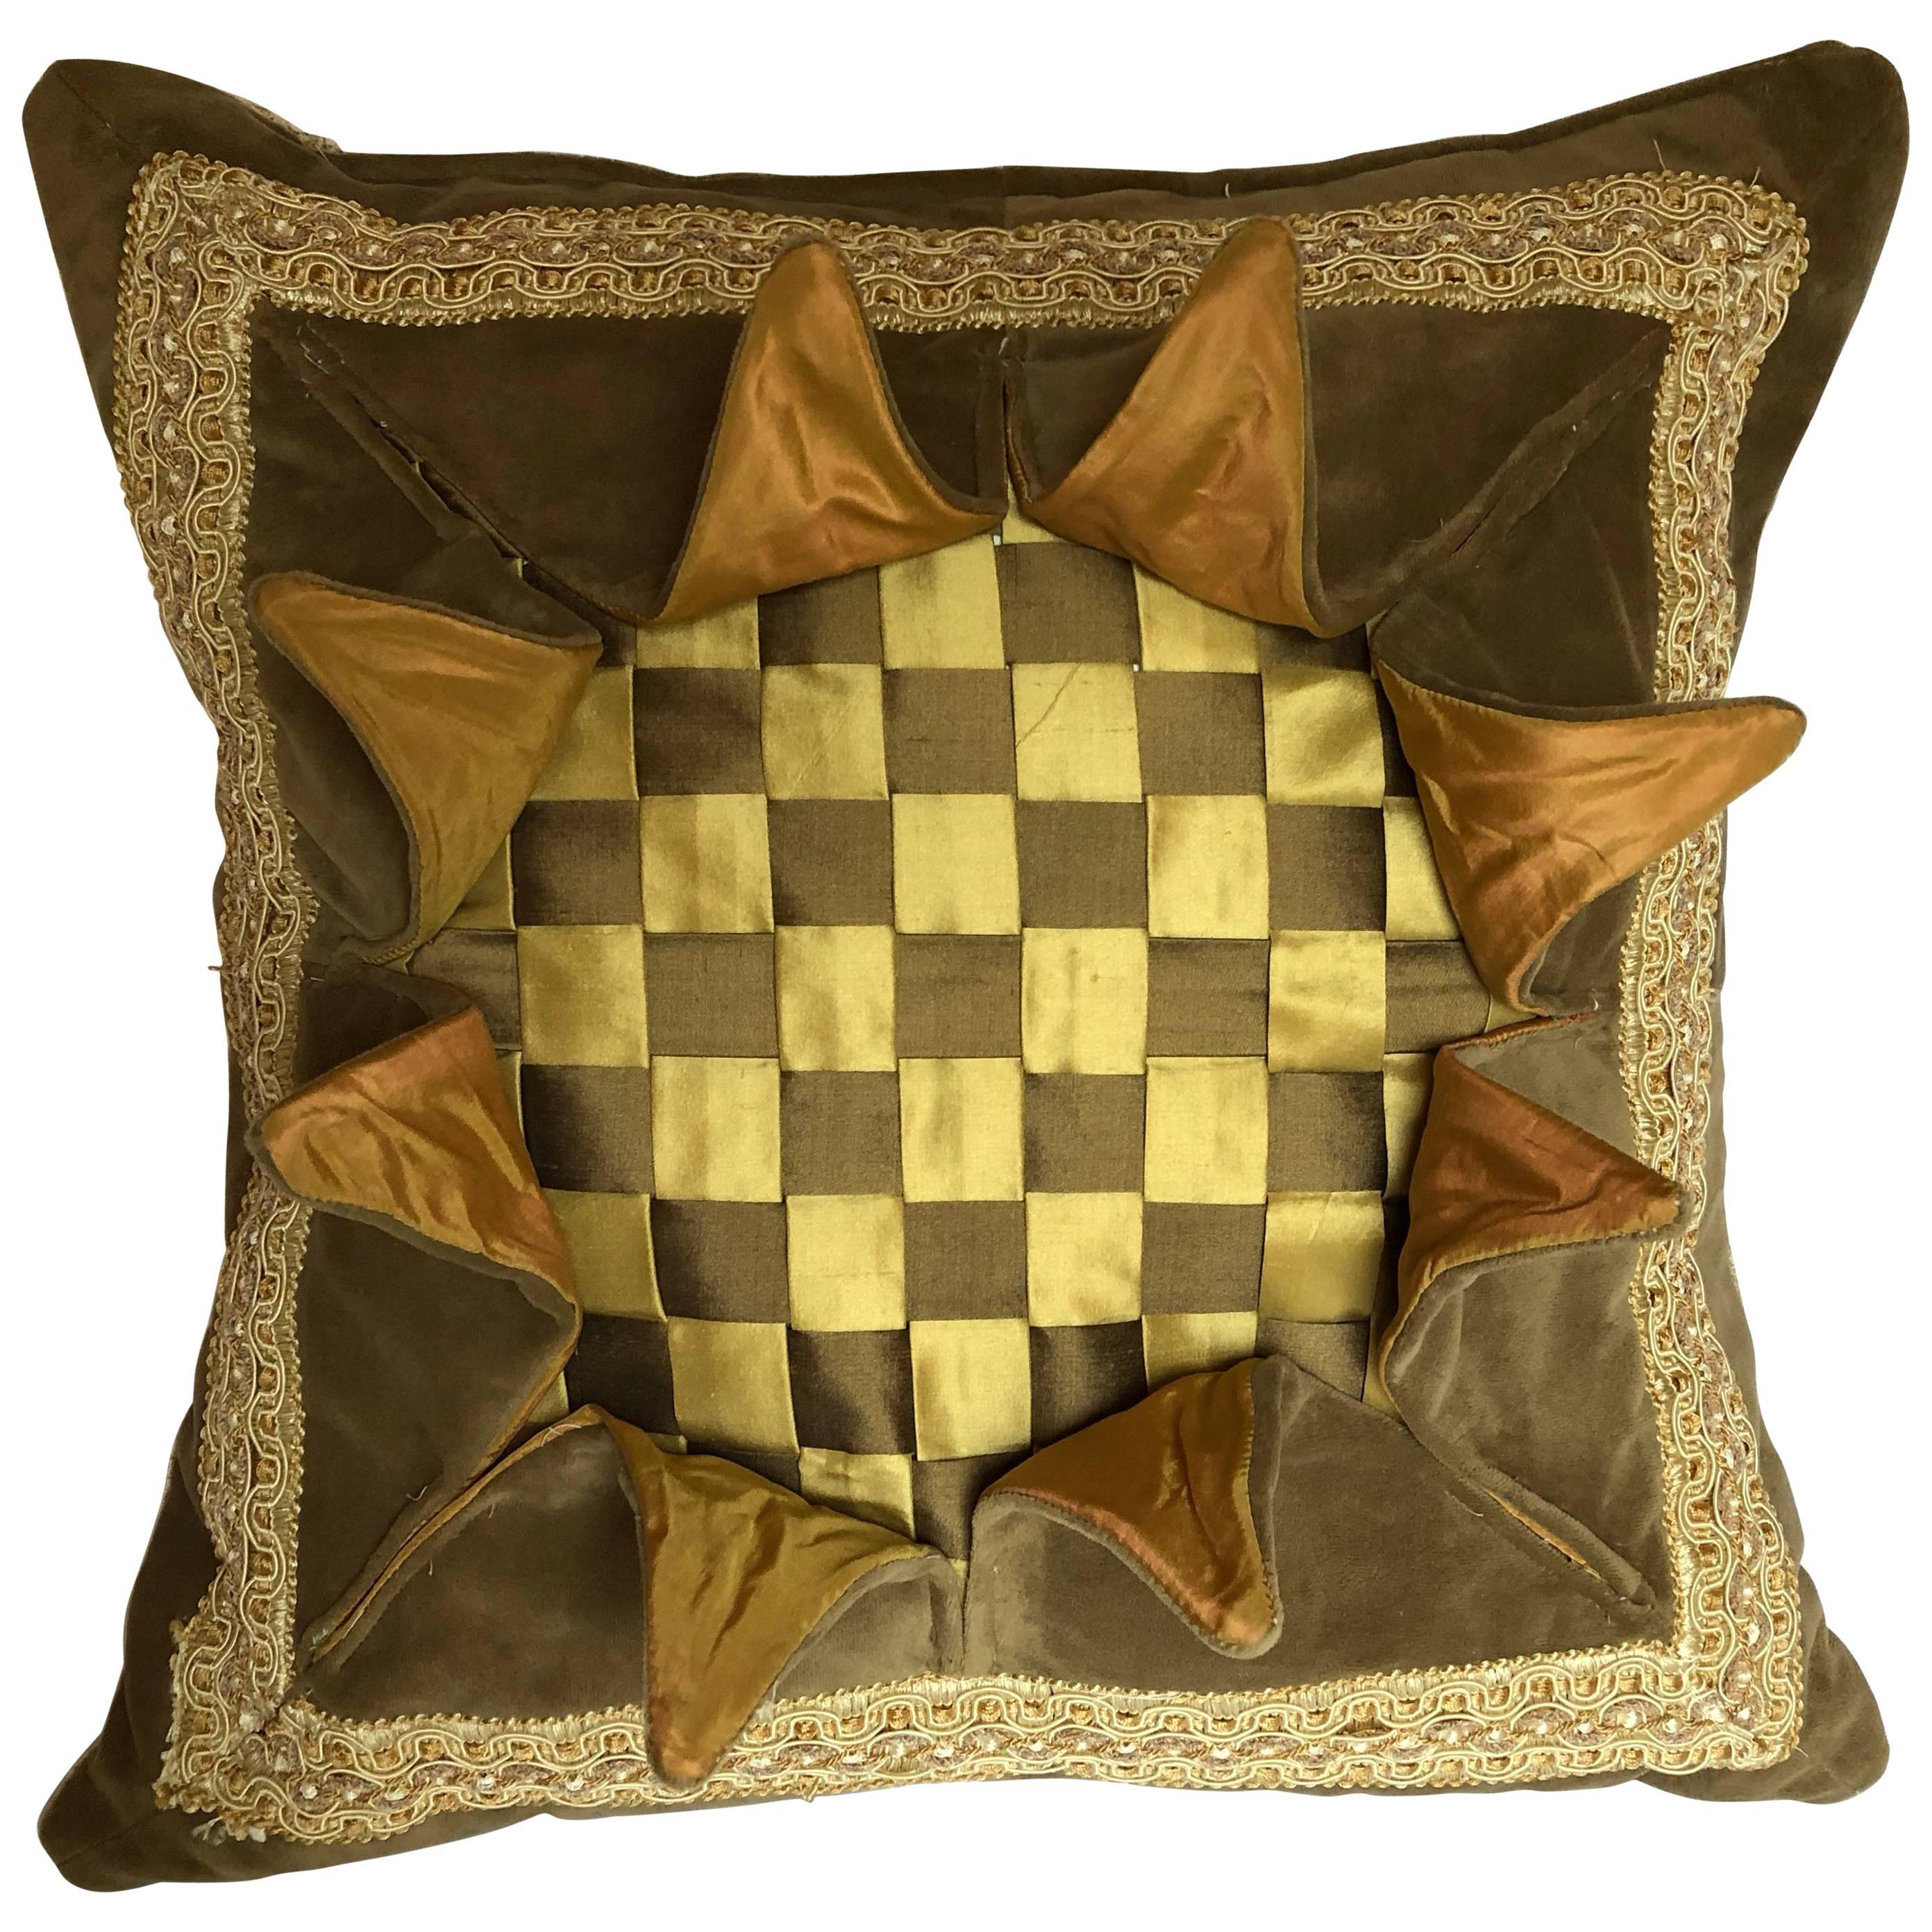 "Explosion" Pillow, Beige, Gold and Tan Throw Pillow For Sale